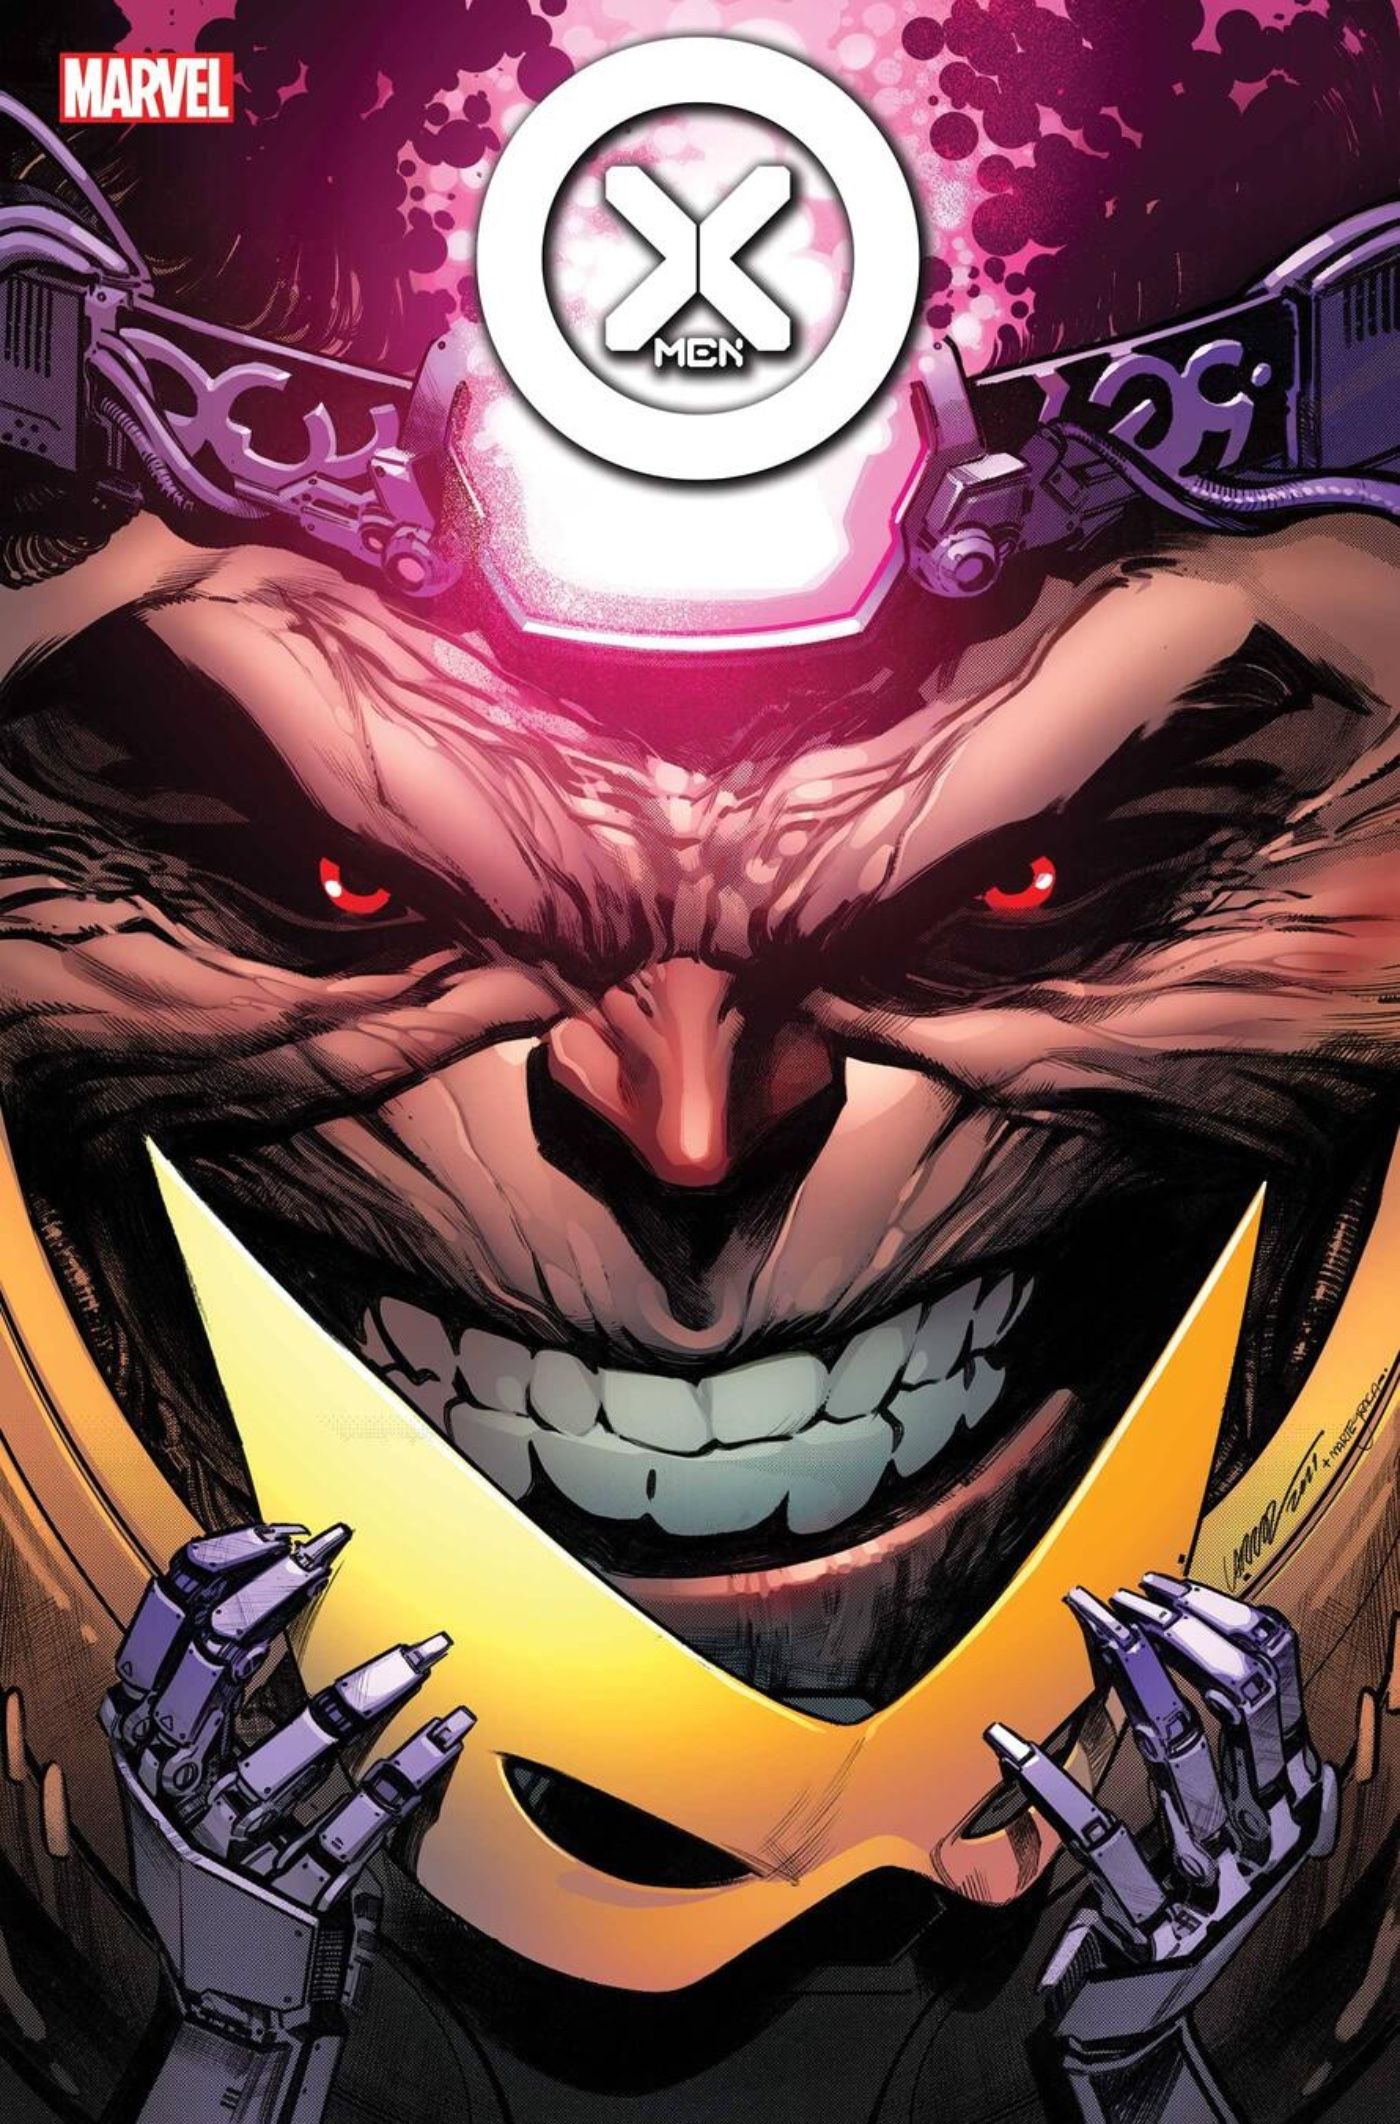 M.O.D.O.K. Shows The X-Men He’s No Laughing Matter in New Preview